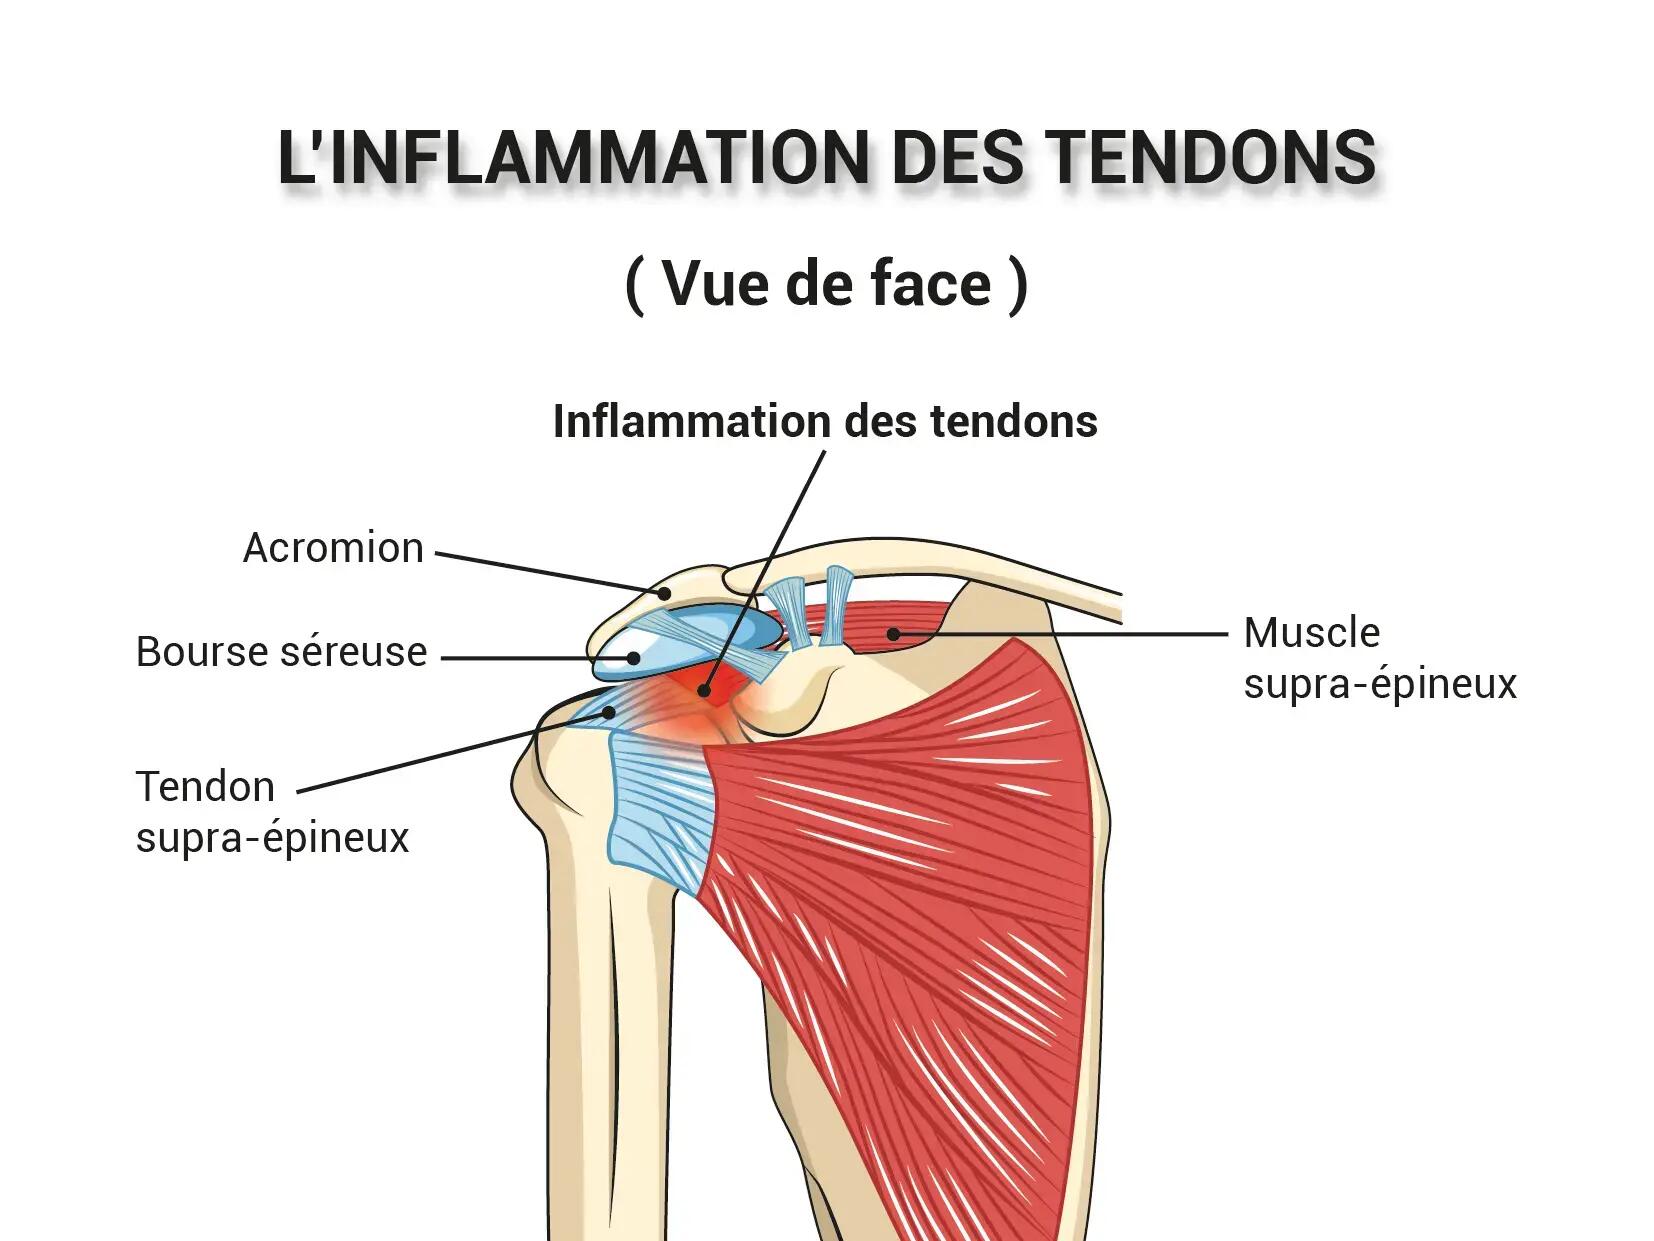 5 exercises to treat and relieve shoulder tendonitis